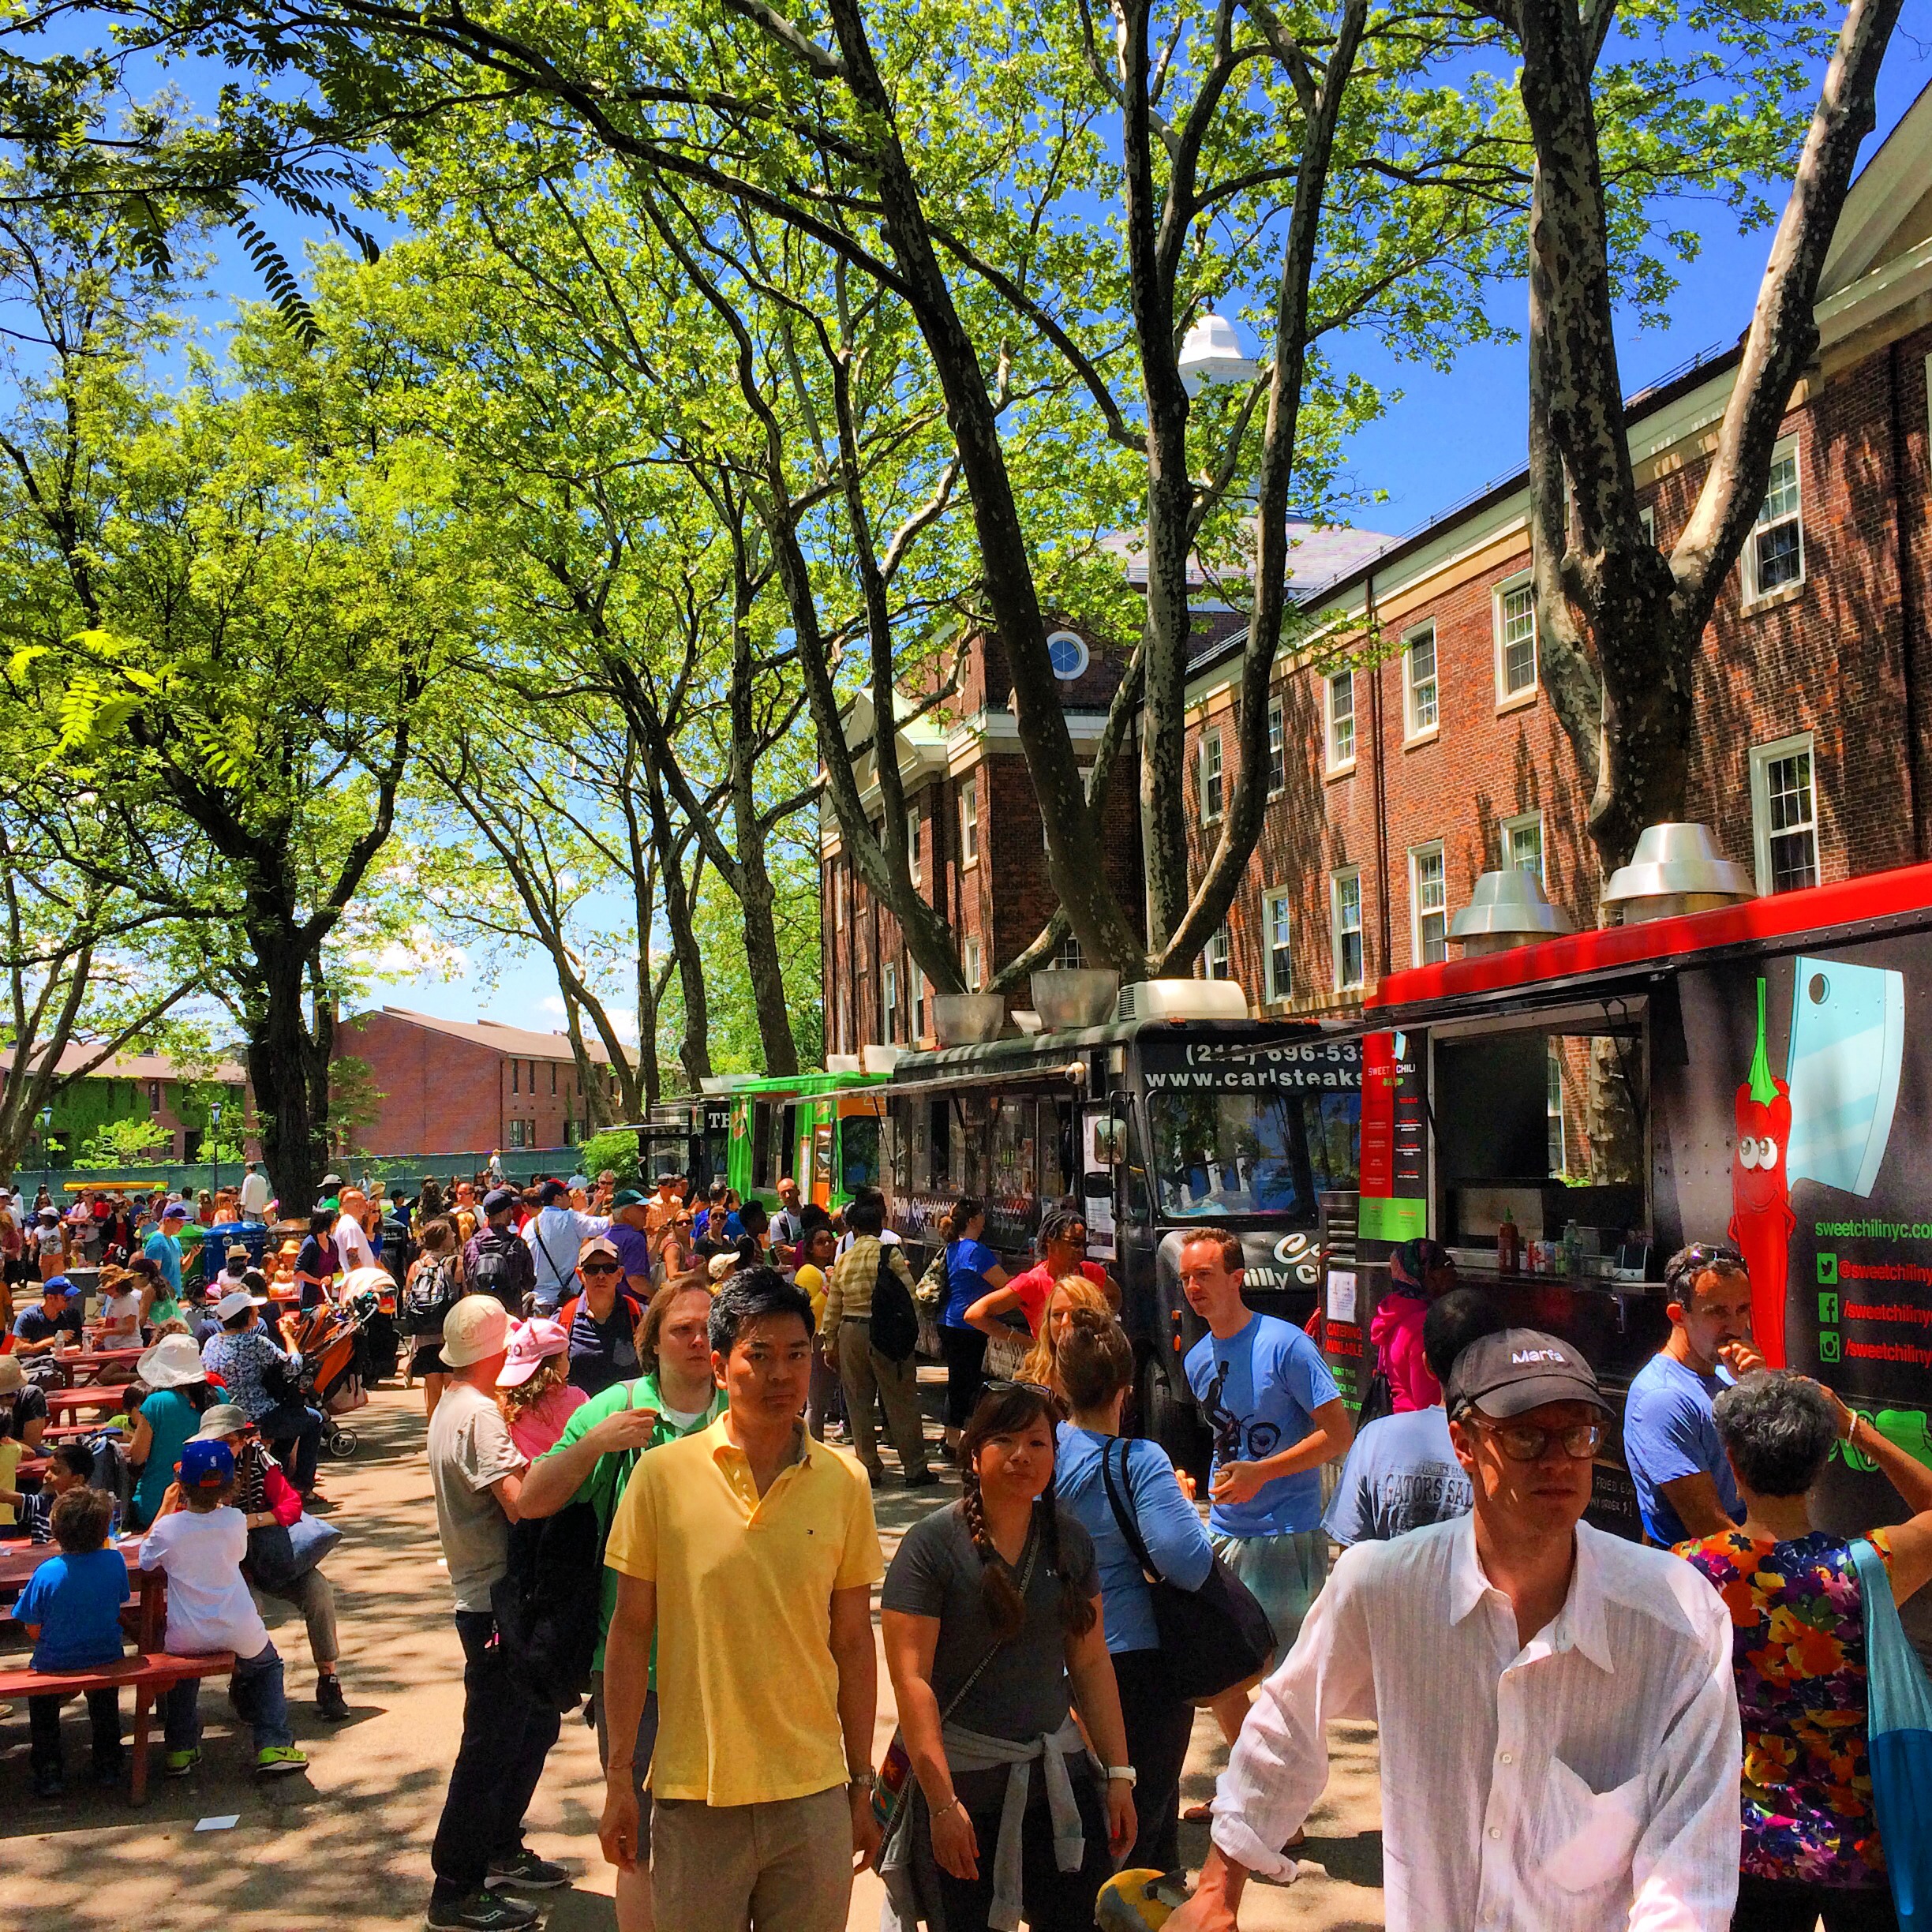 Food trucks on Governors Island. (Credit: The Live Fast Group)